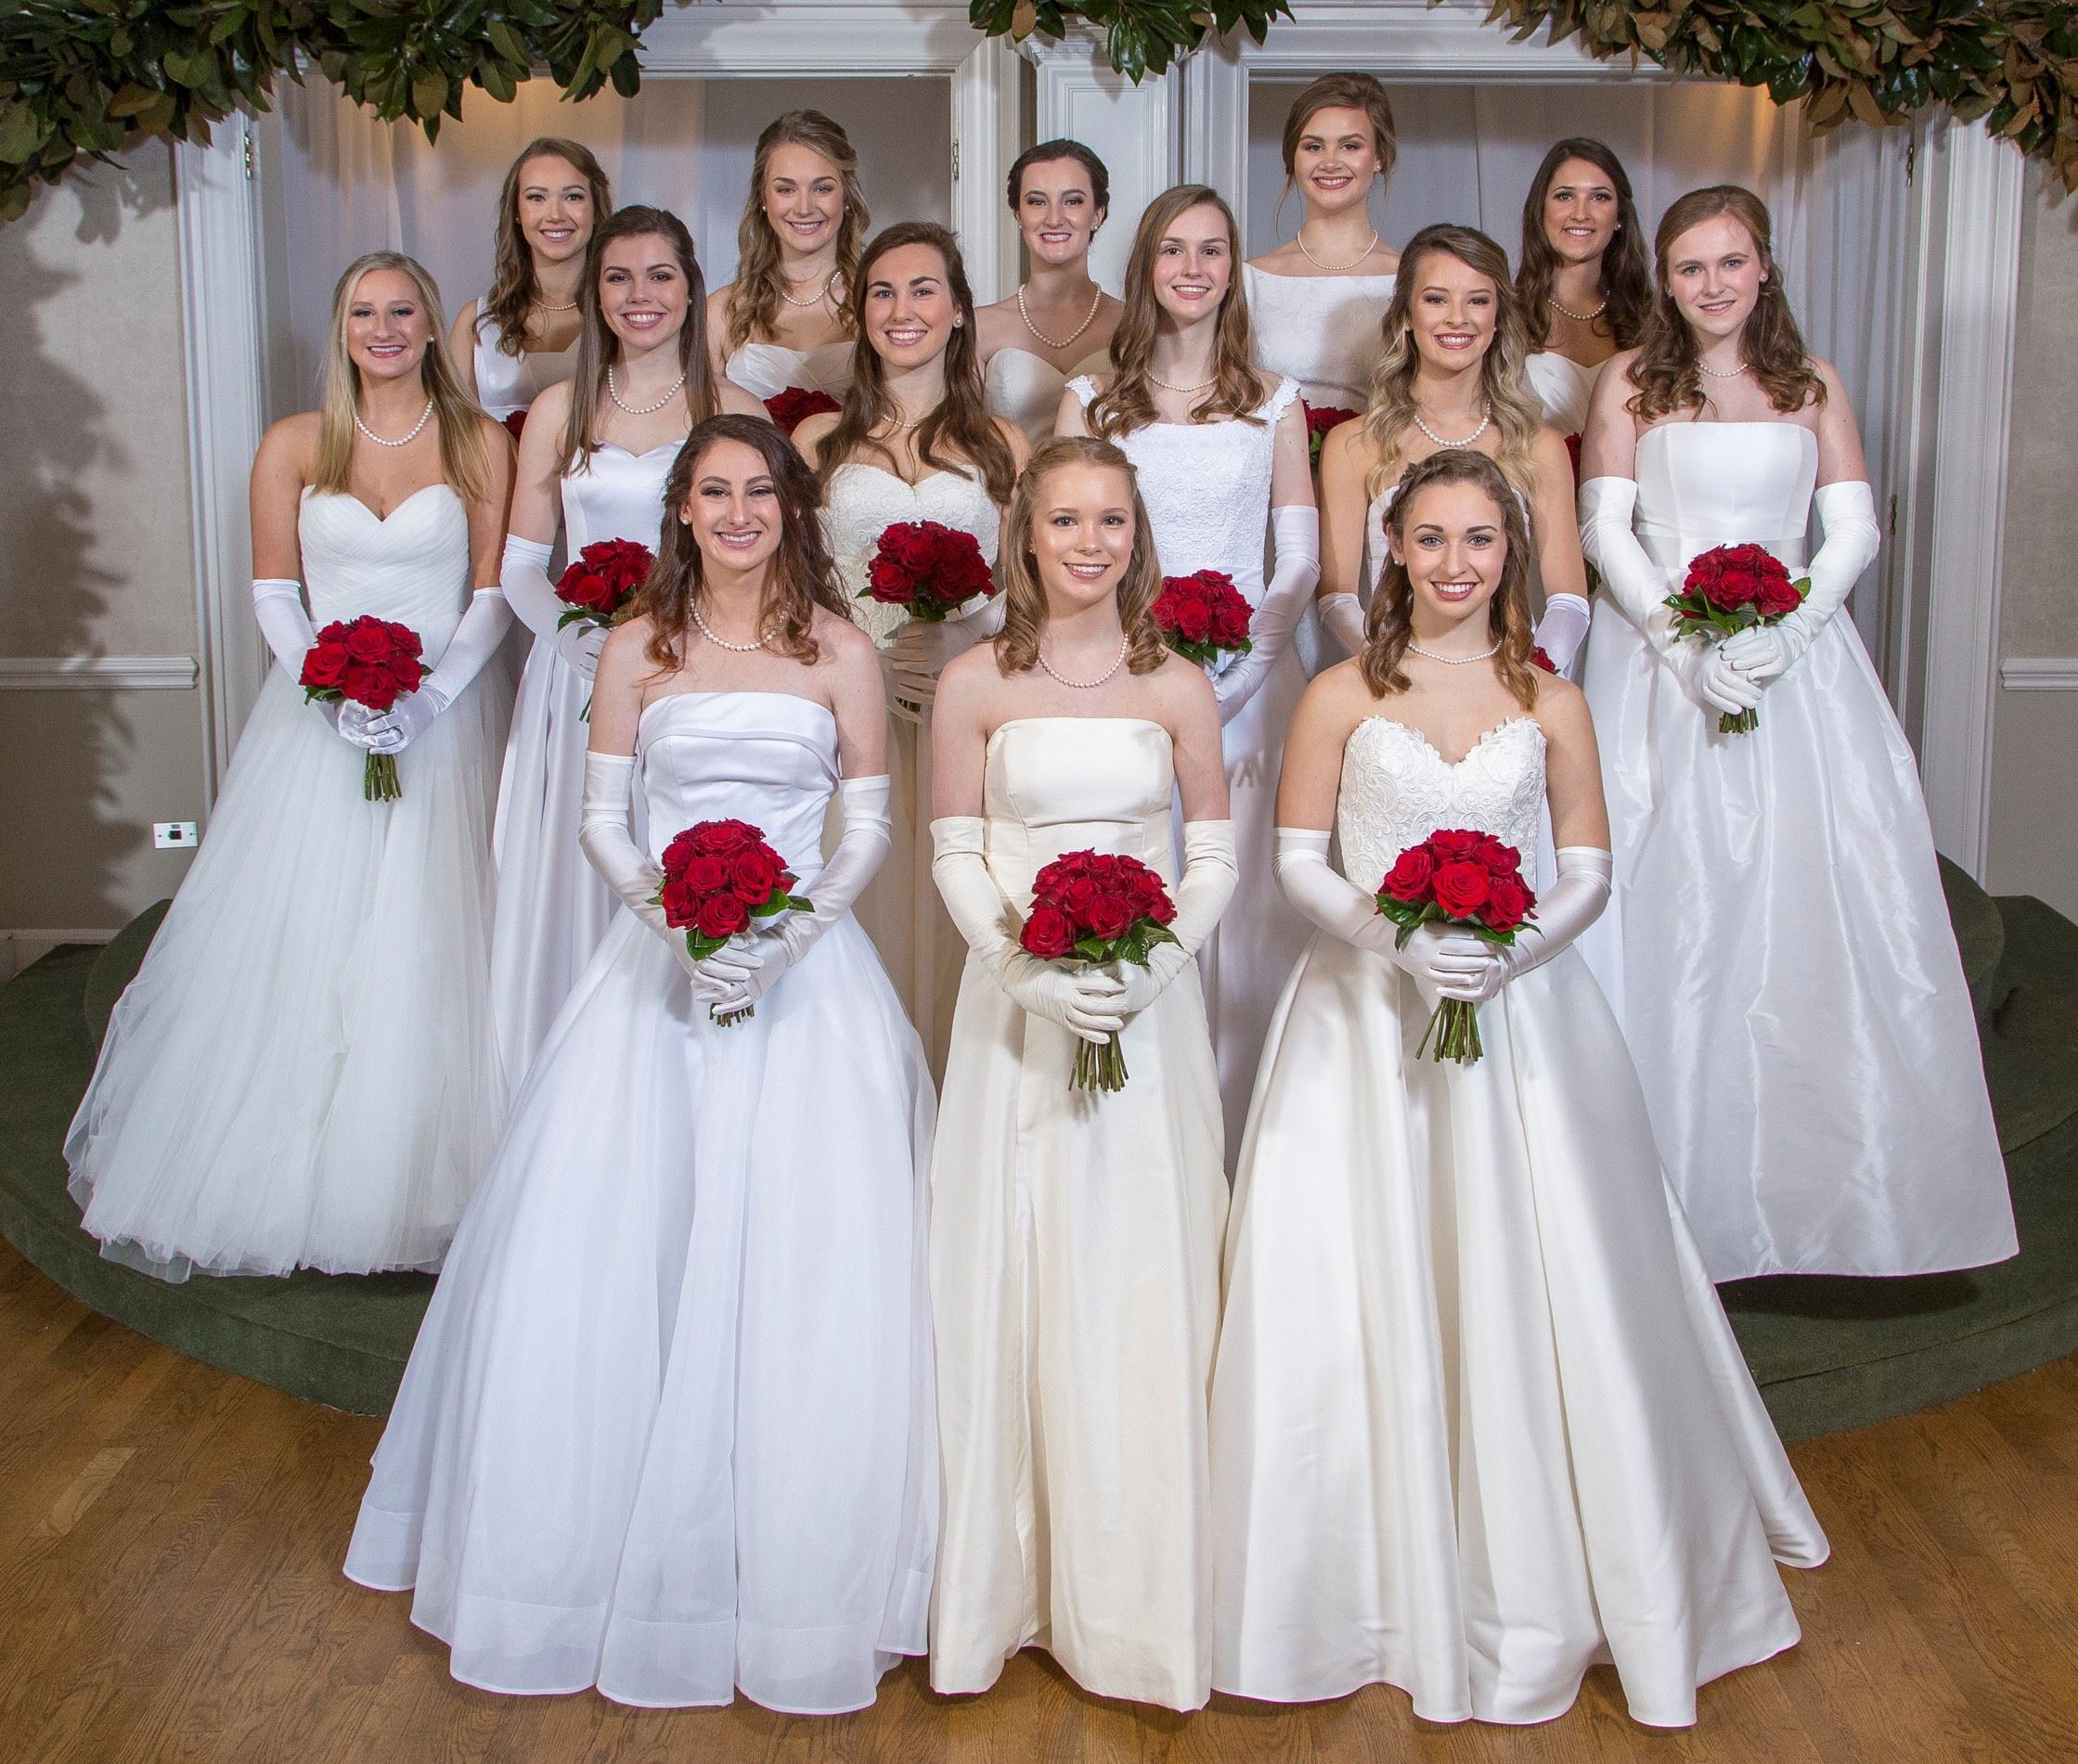 Photo of the models wearing bridal gowns